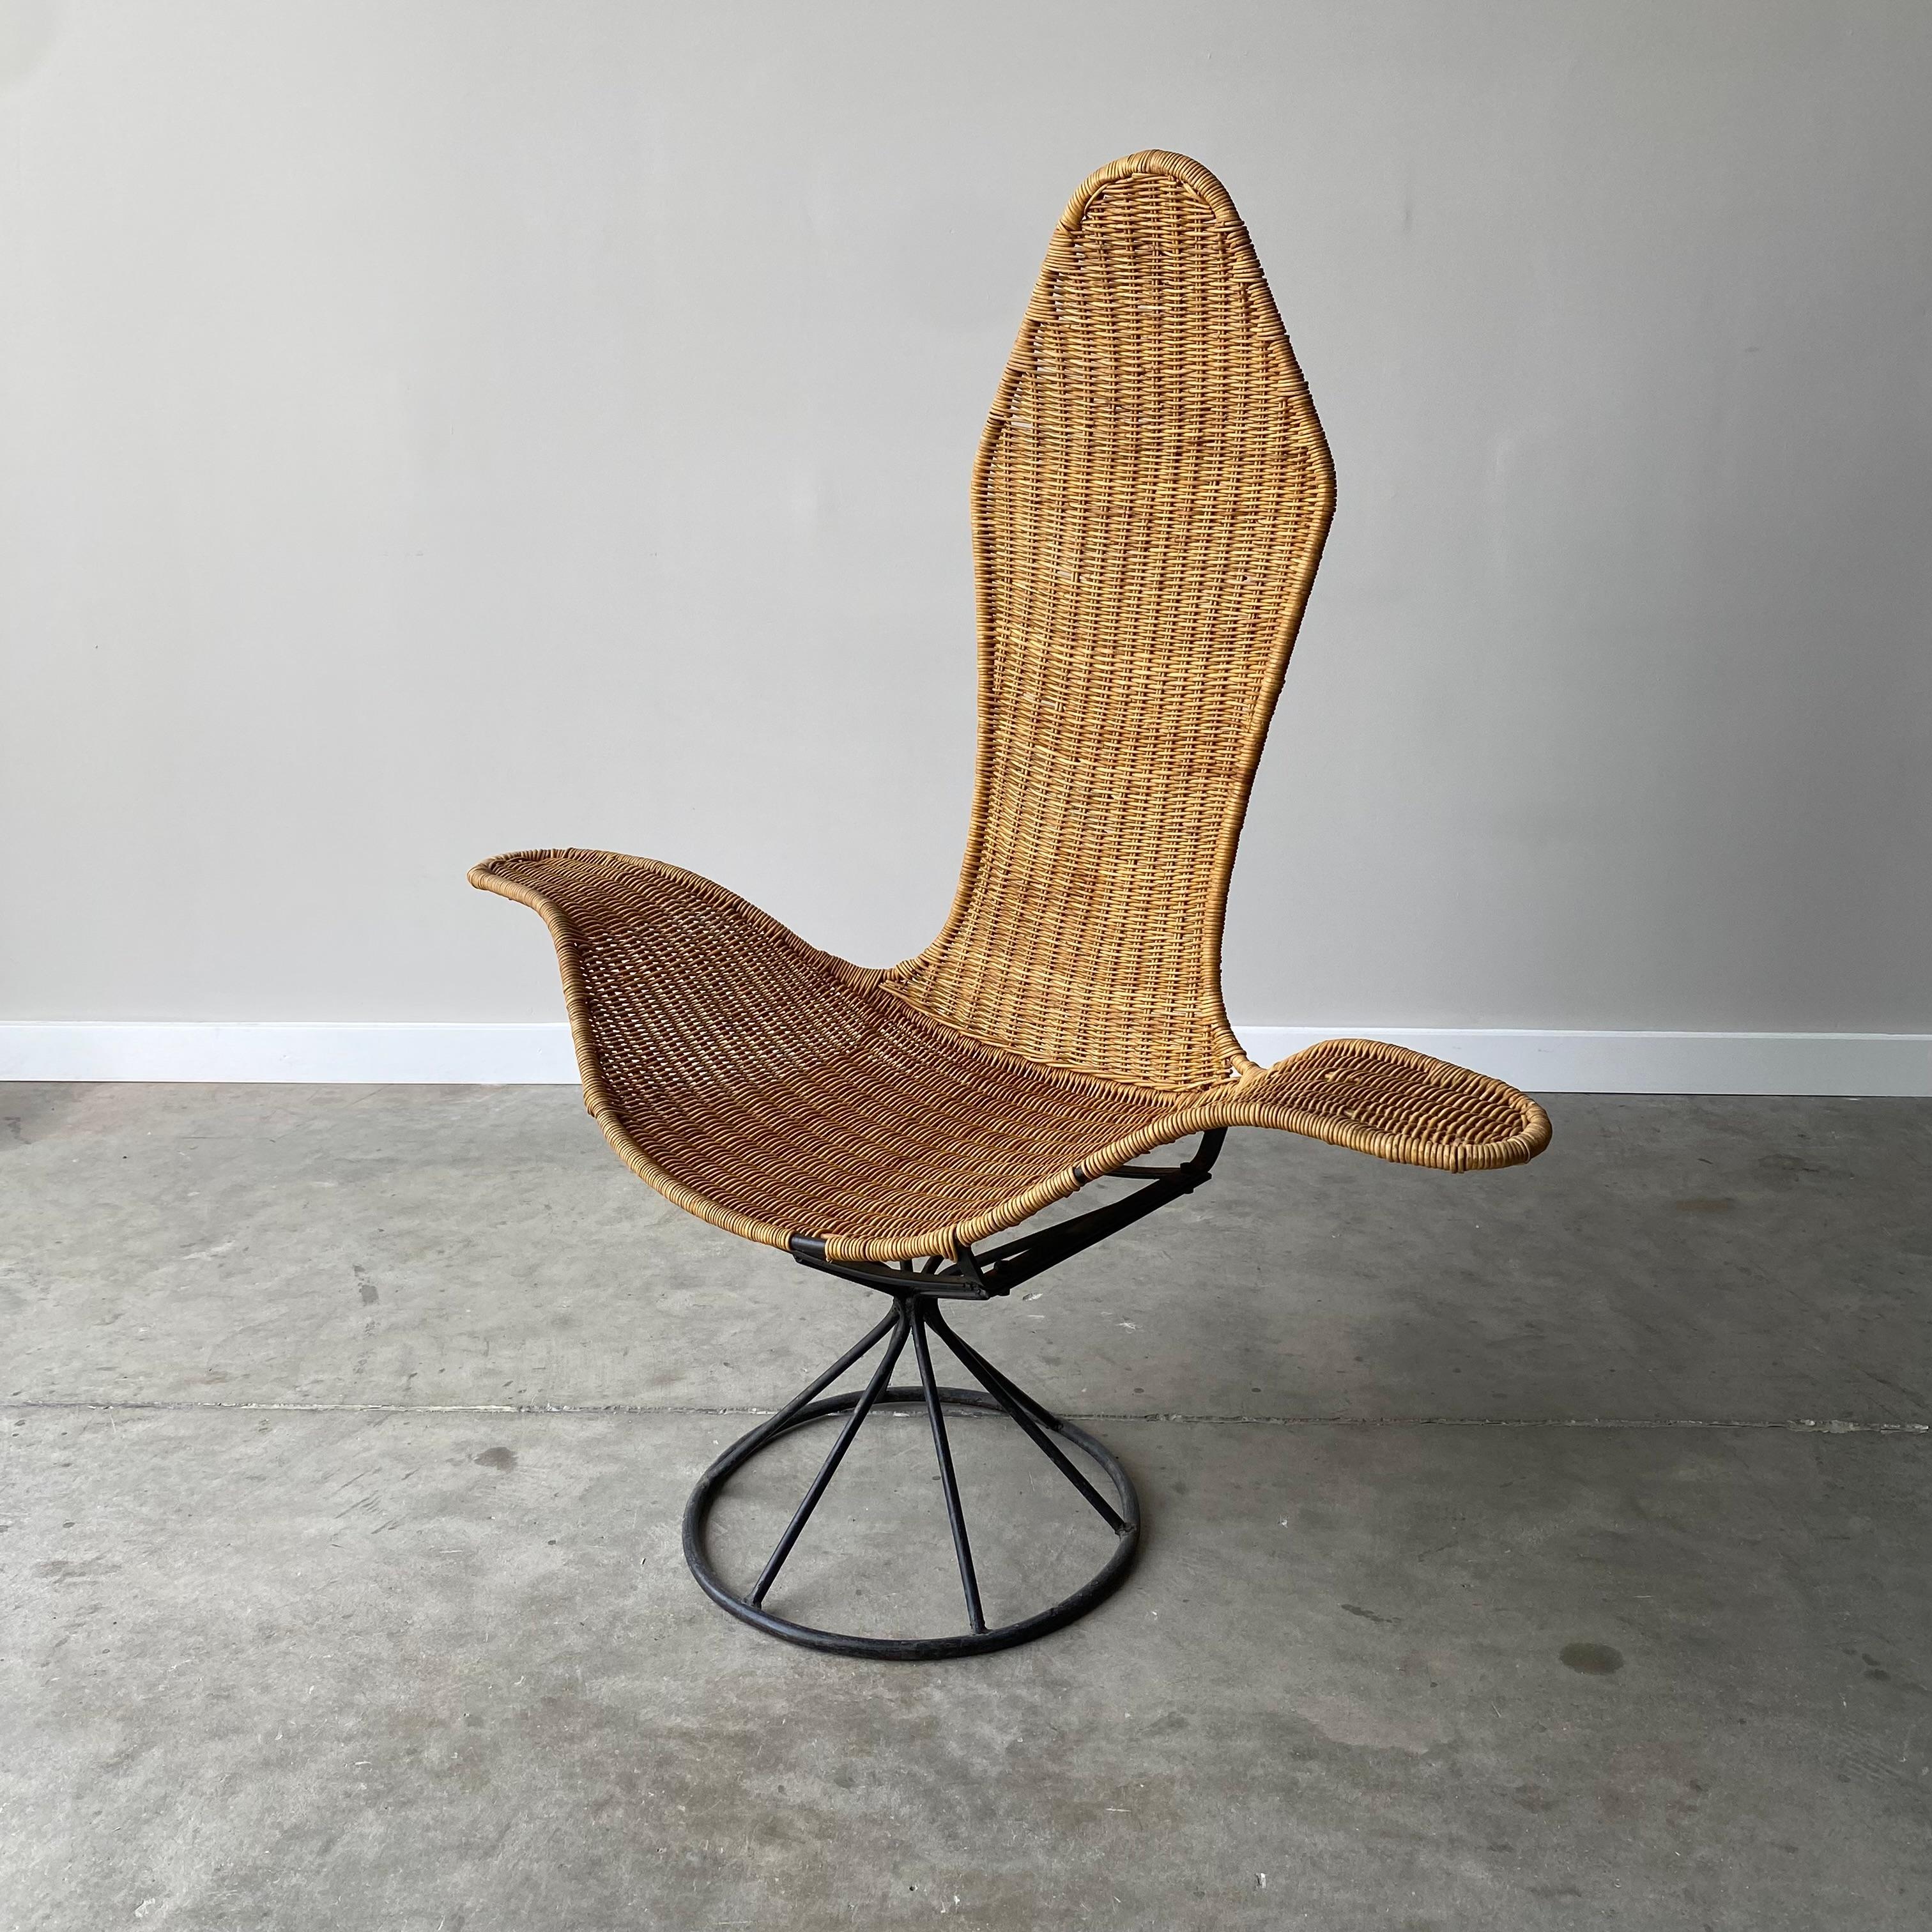 Danny Ho Fong designed this wave chair for Tropi-cal in the late 1960's. It consists of a steel frame and hand woven rattan.  Its organic nature makes it perfect for a space that needs a little texture and a lot of sculptural quality. 